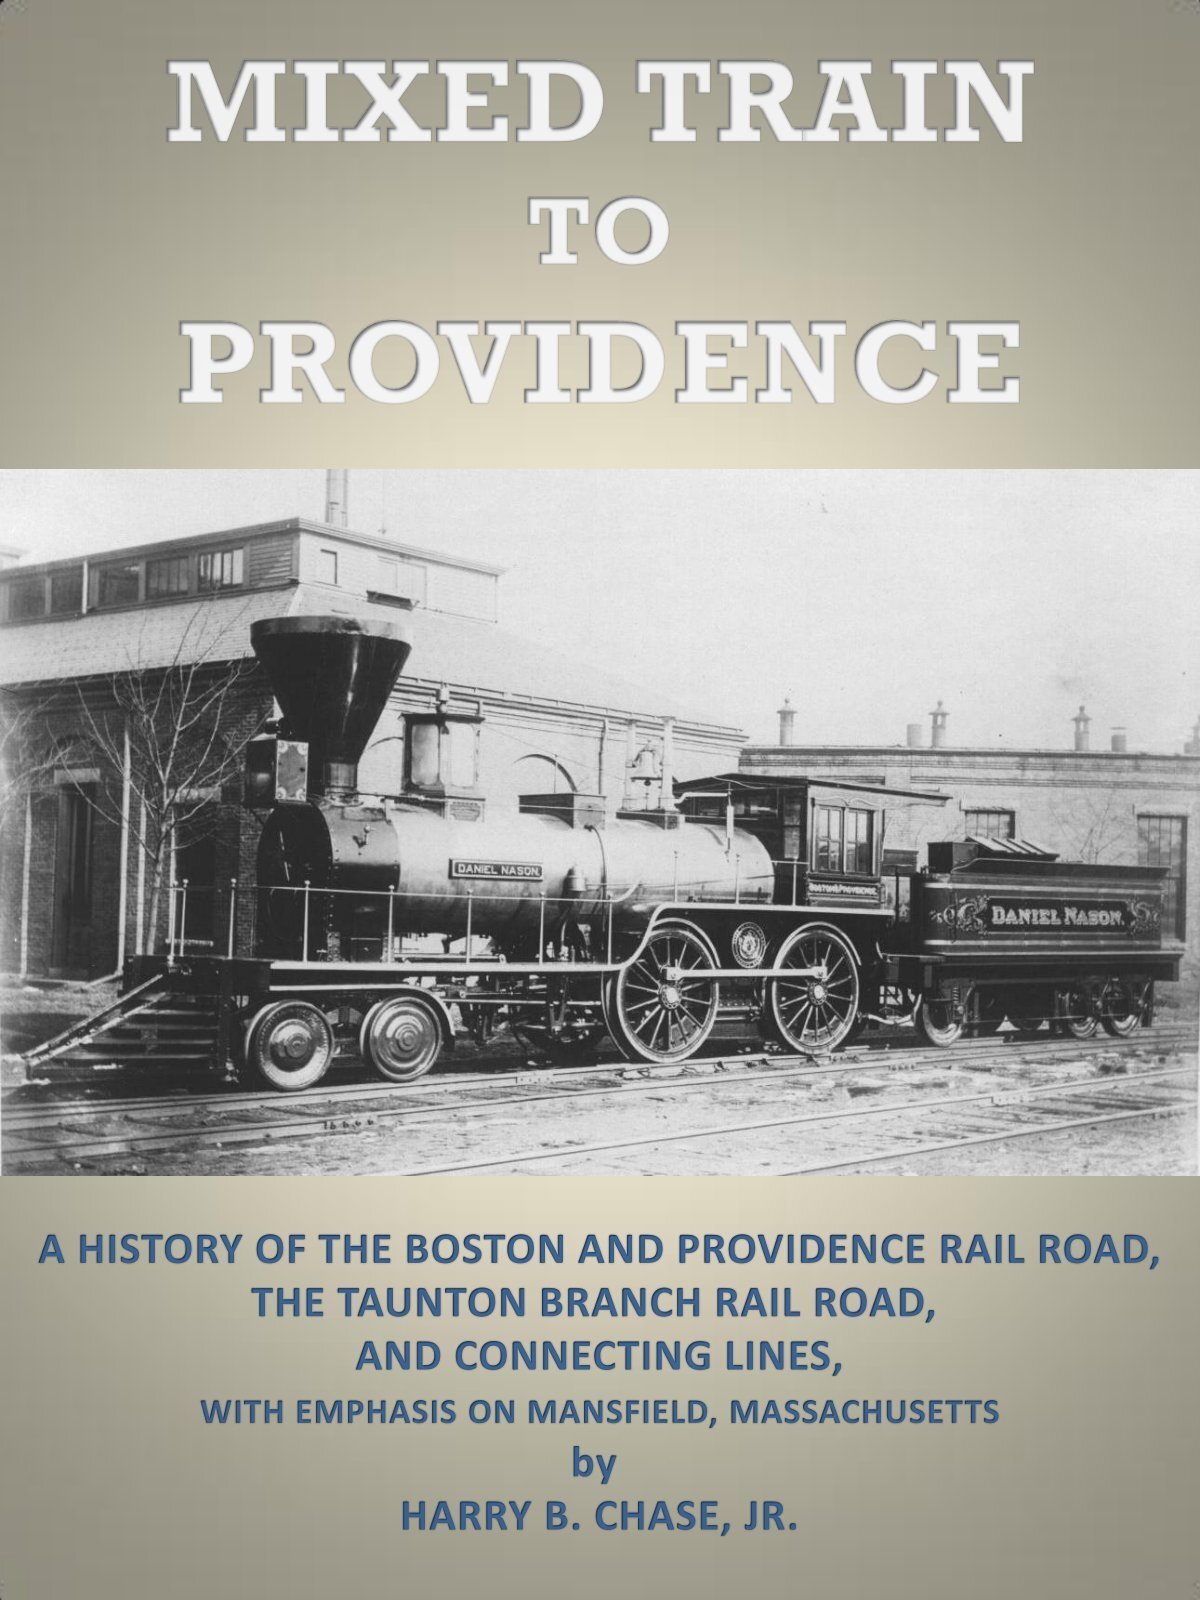 mixed train to providence - Thomas J. Dodd Research Center